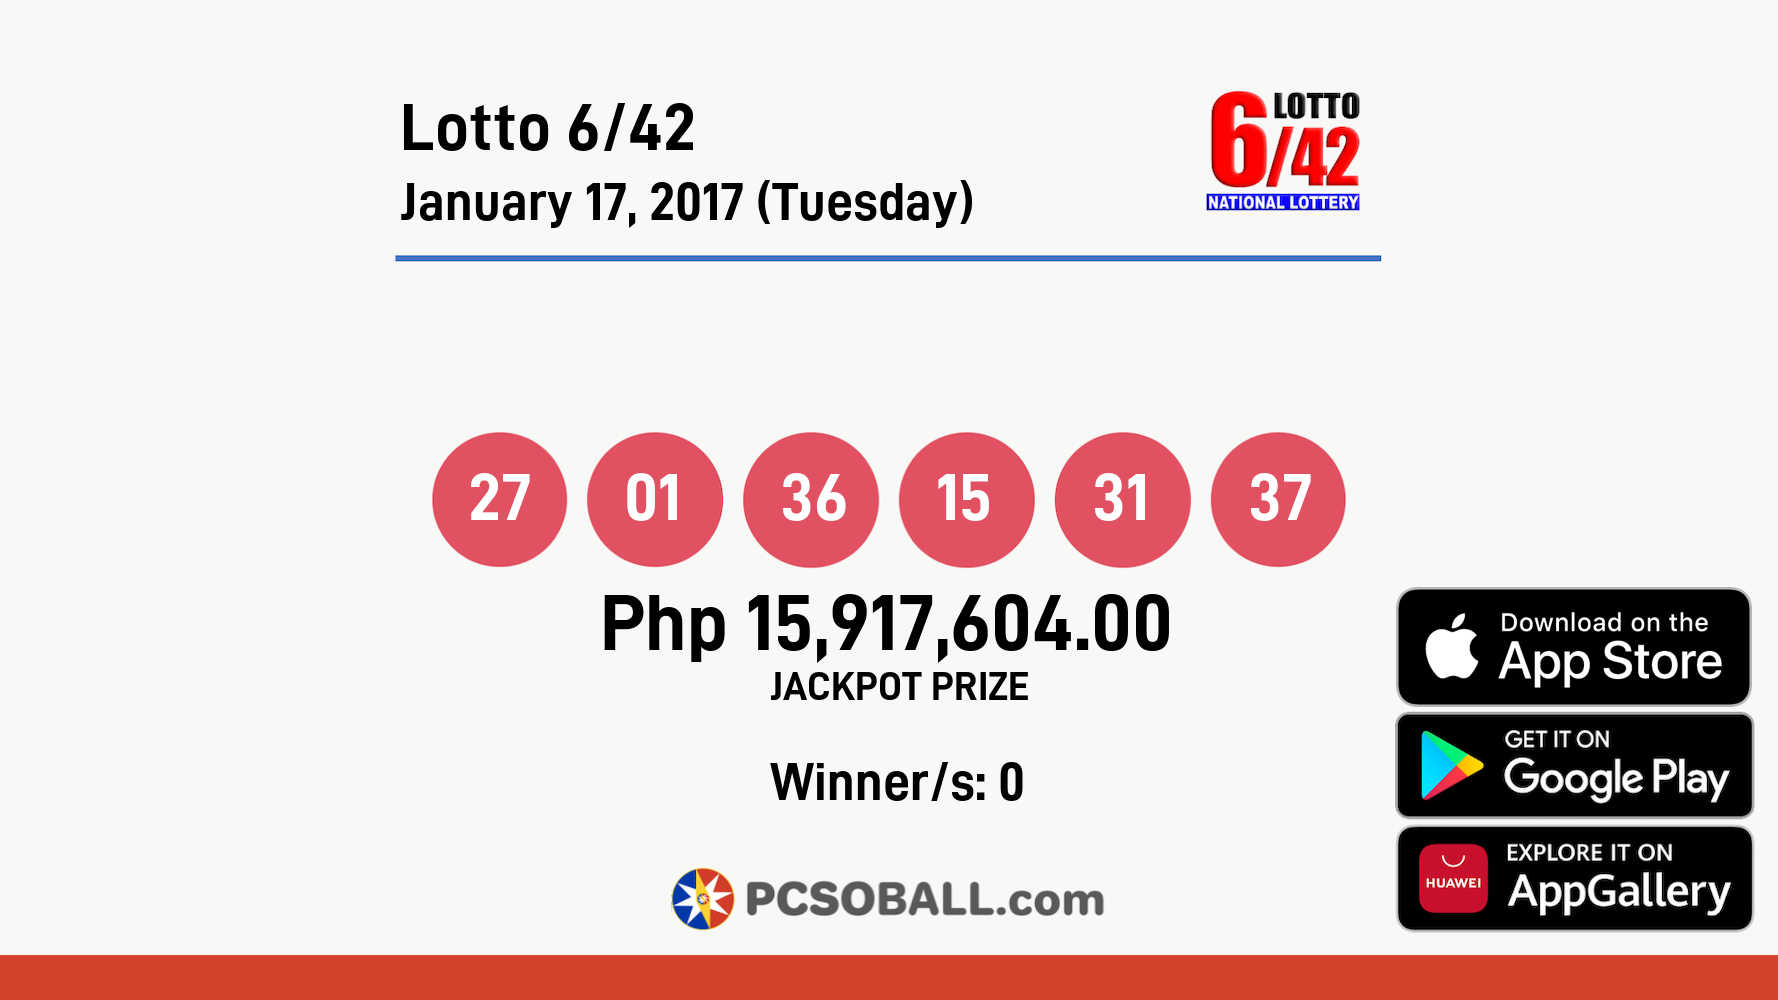 Lotto 6/42 January 17, 2017 (Tuesday) Result